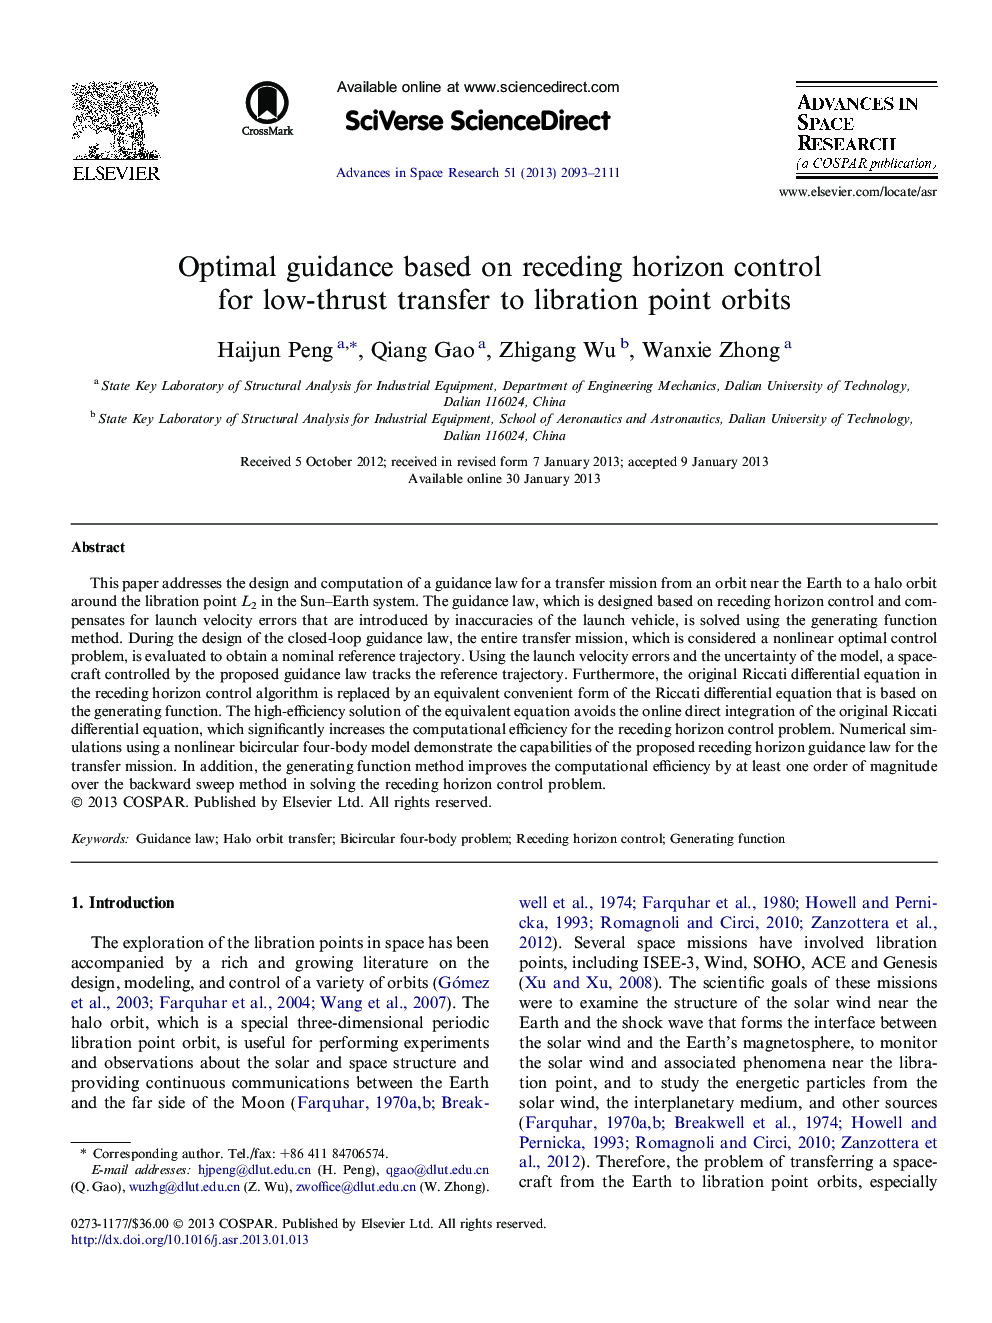 Optimal guidance based on receding horizon control for low-thrust transfer to libration point orbits